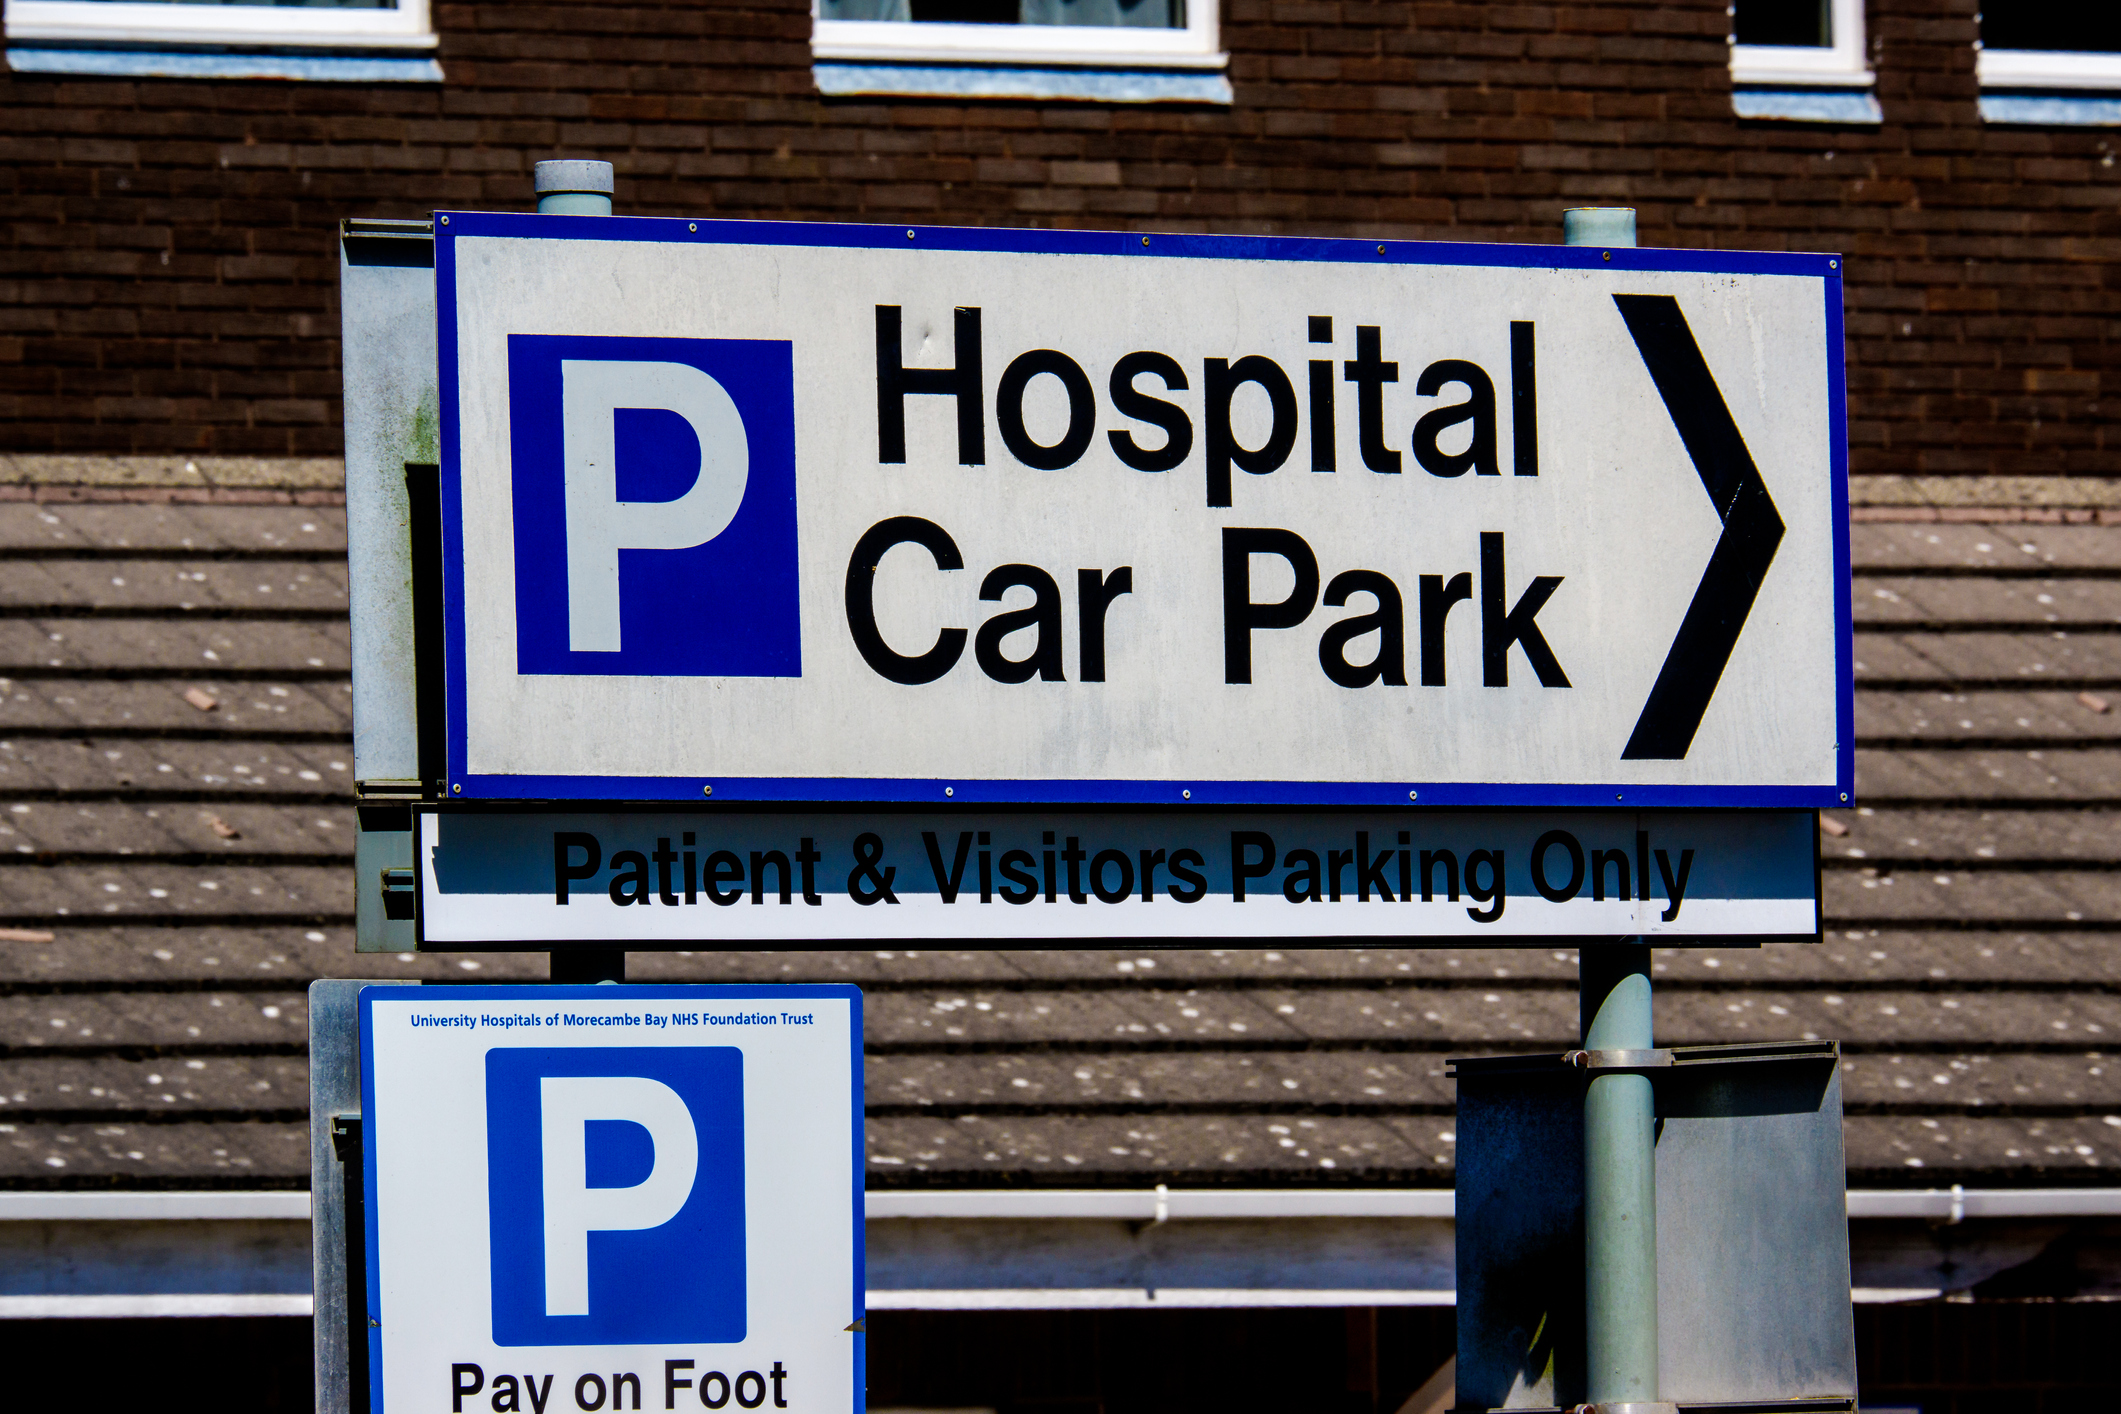 The First In Our Series Of Exploring Parking Challenges,This Week We Deep Dive Into Hospital Parking, On A Global Scale 